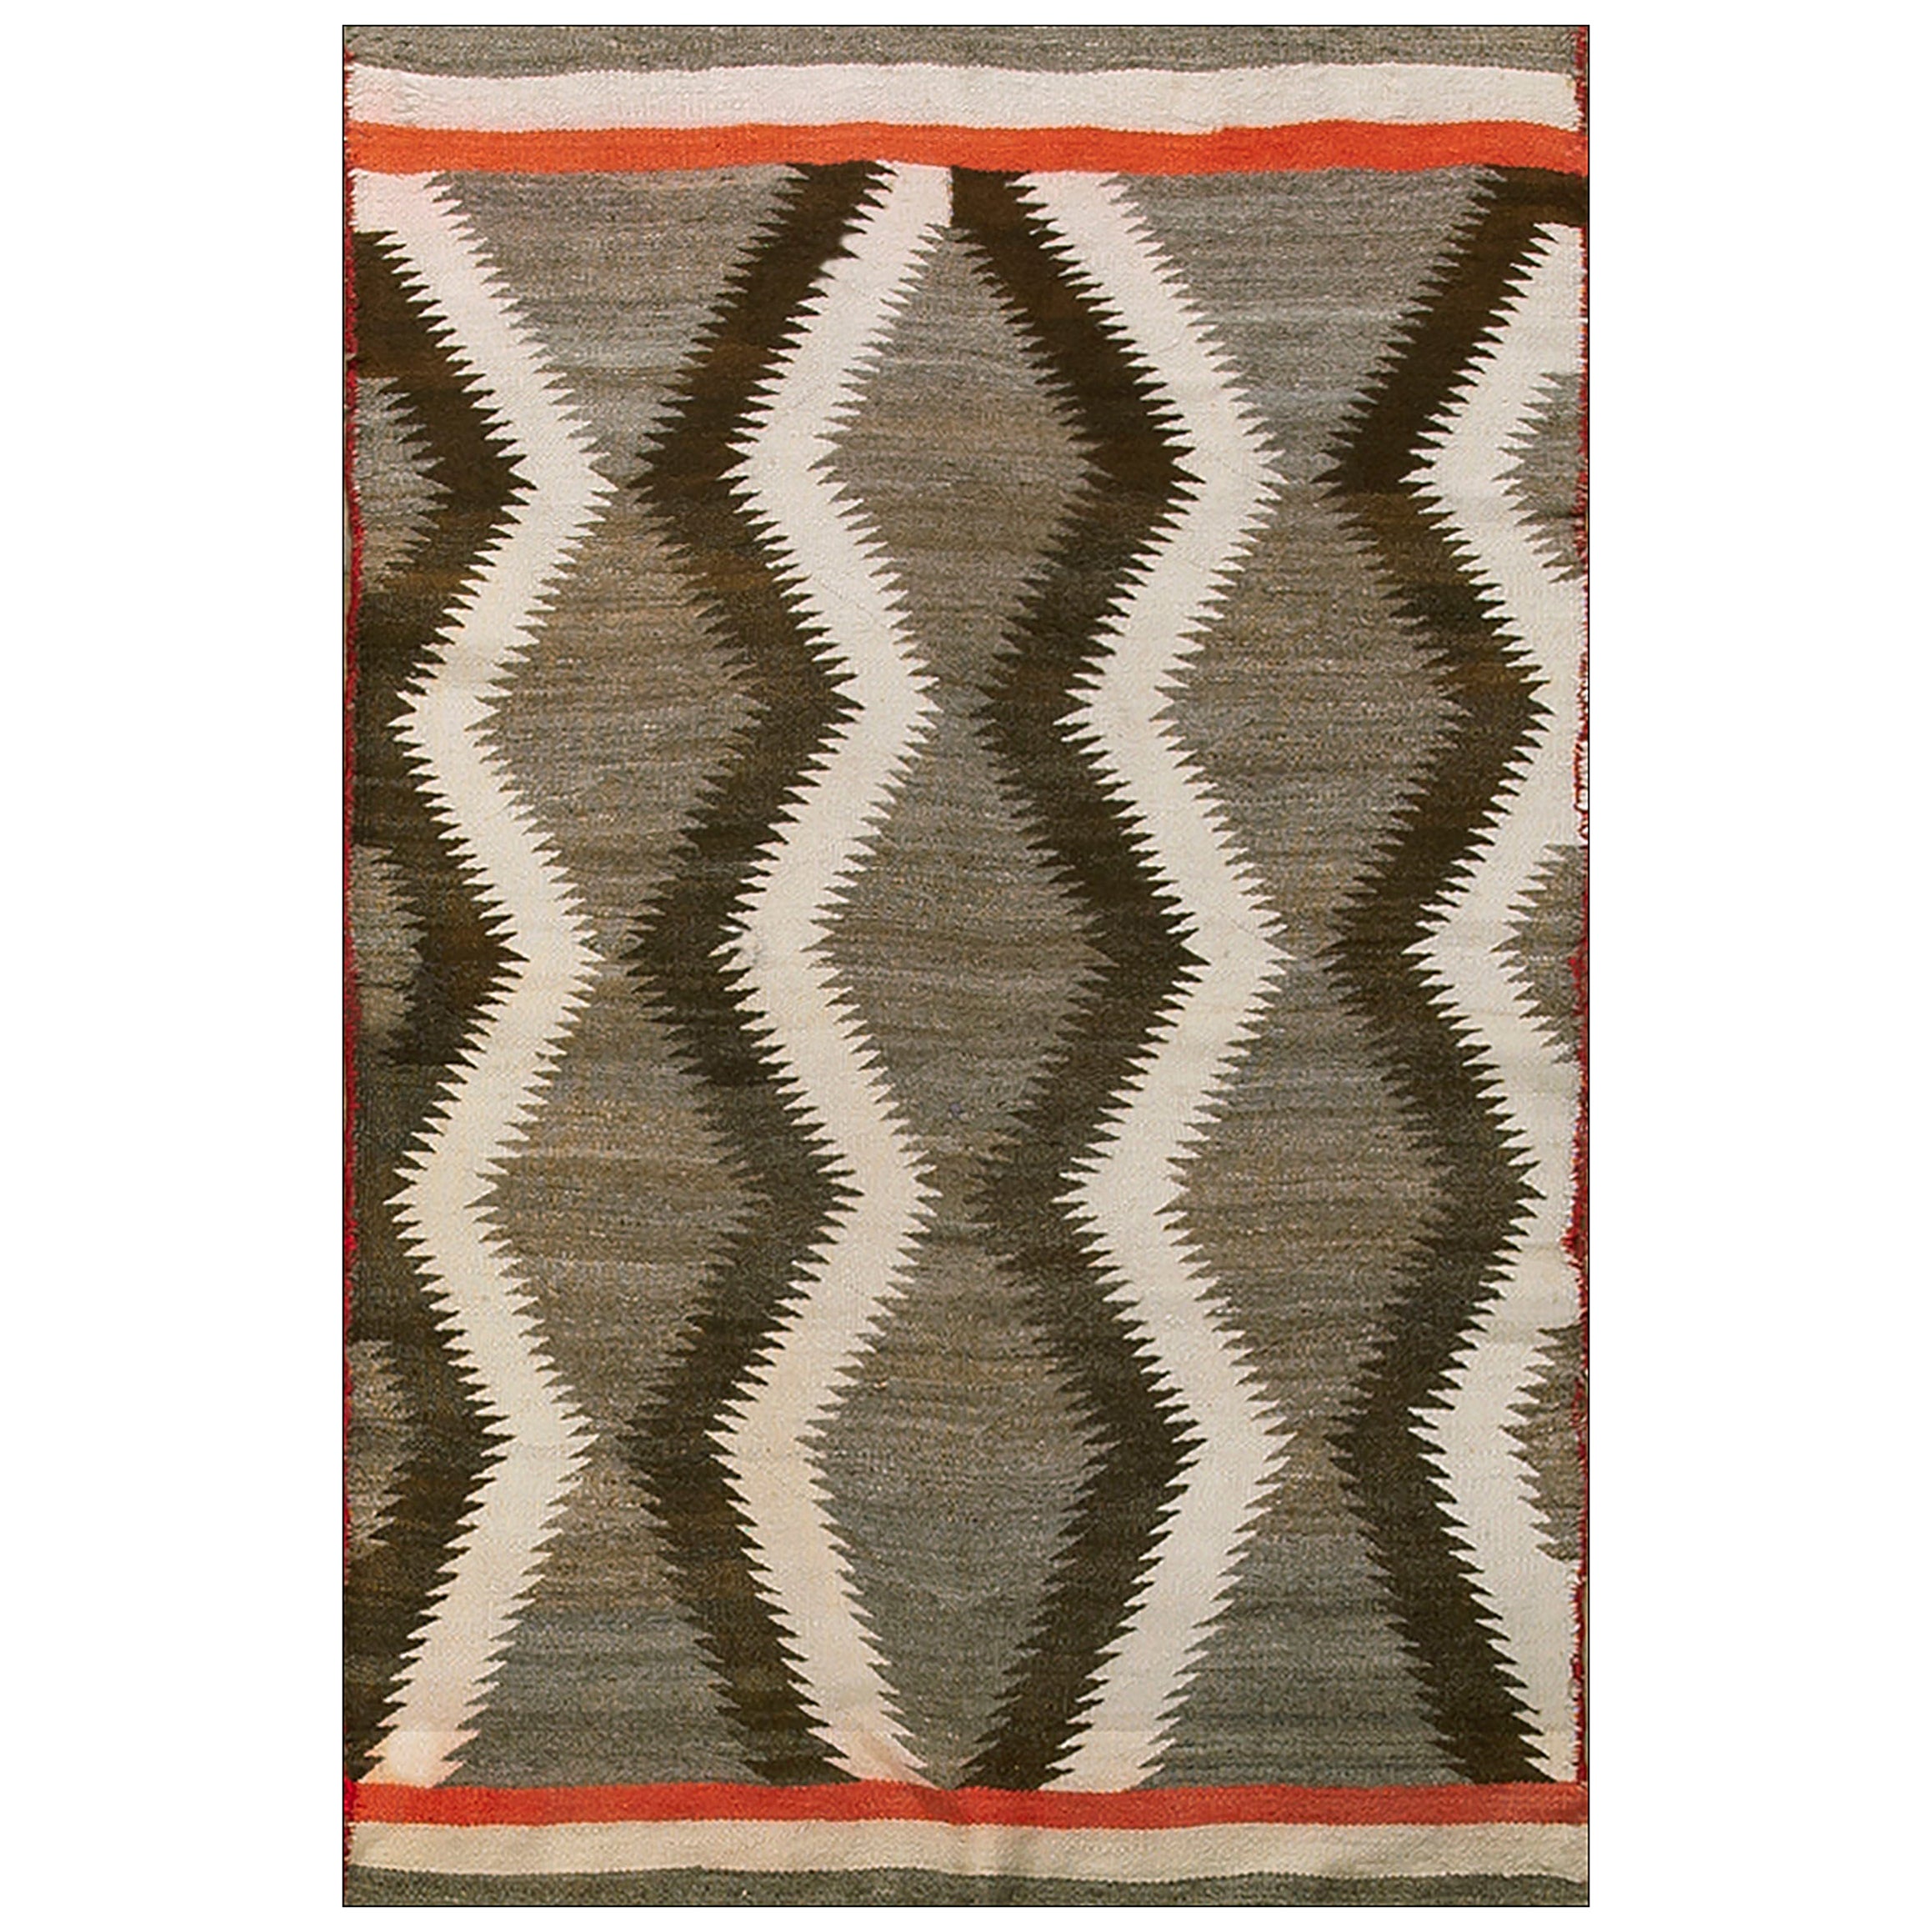 Early 20th Century American Navajo Carpet ( 3'4" x 5'3" - 102 x 160 ) For Sale